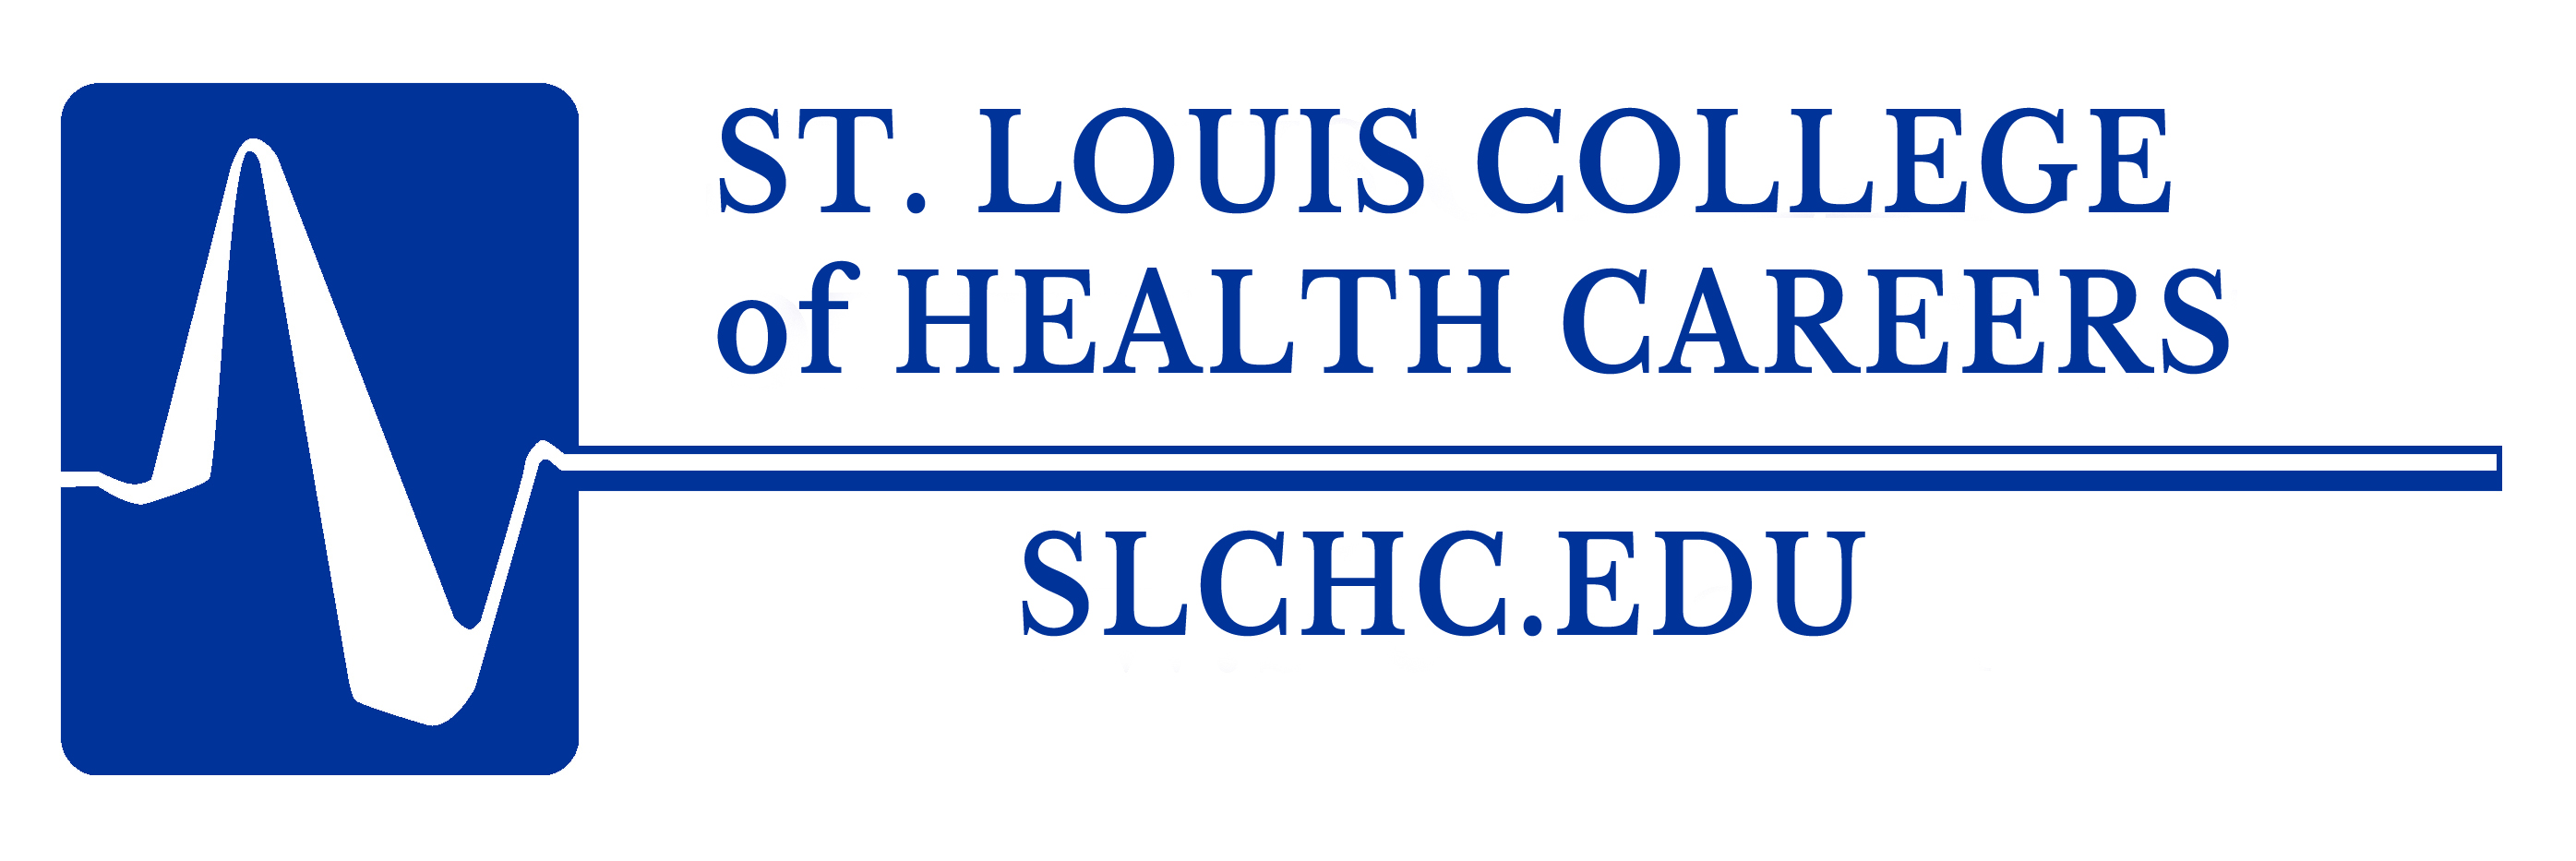 St. Louis College of Health Careers Logo